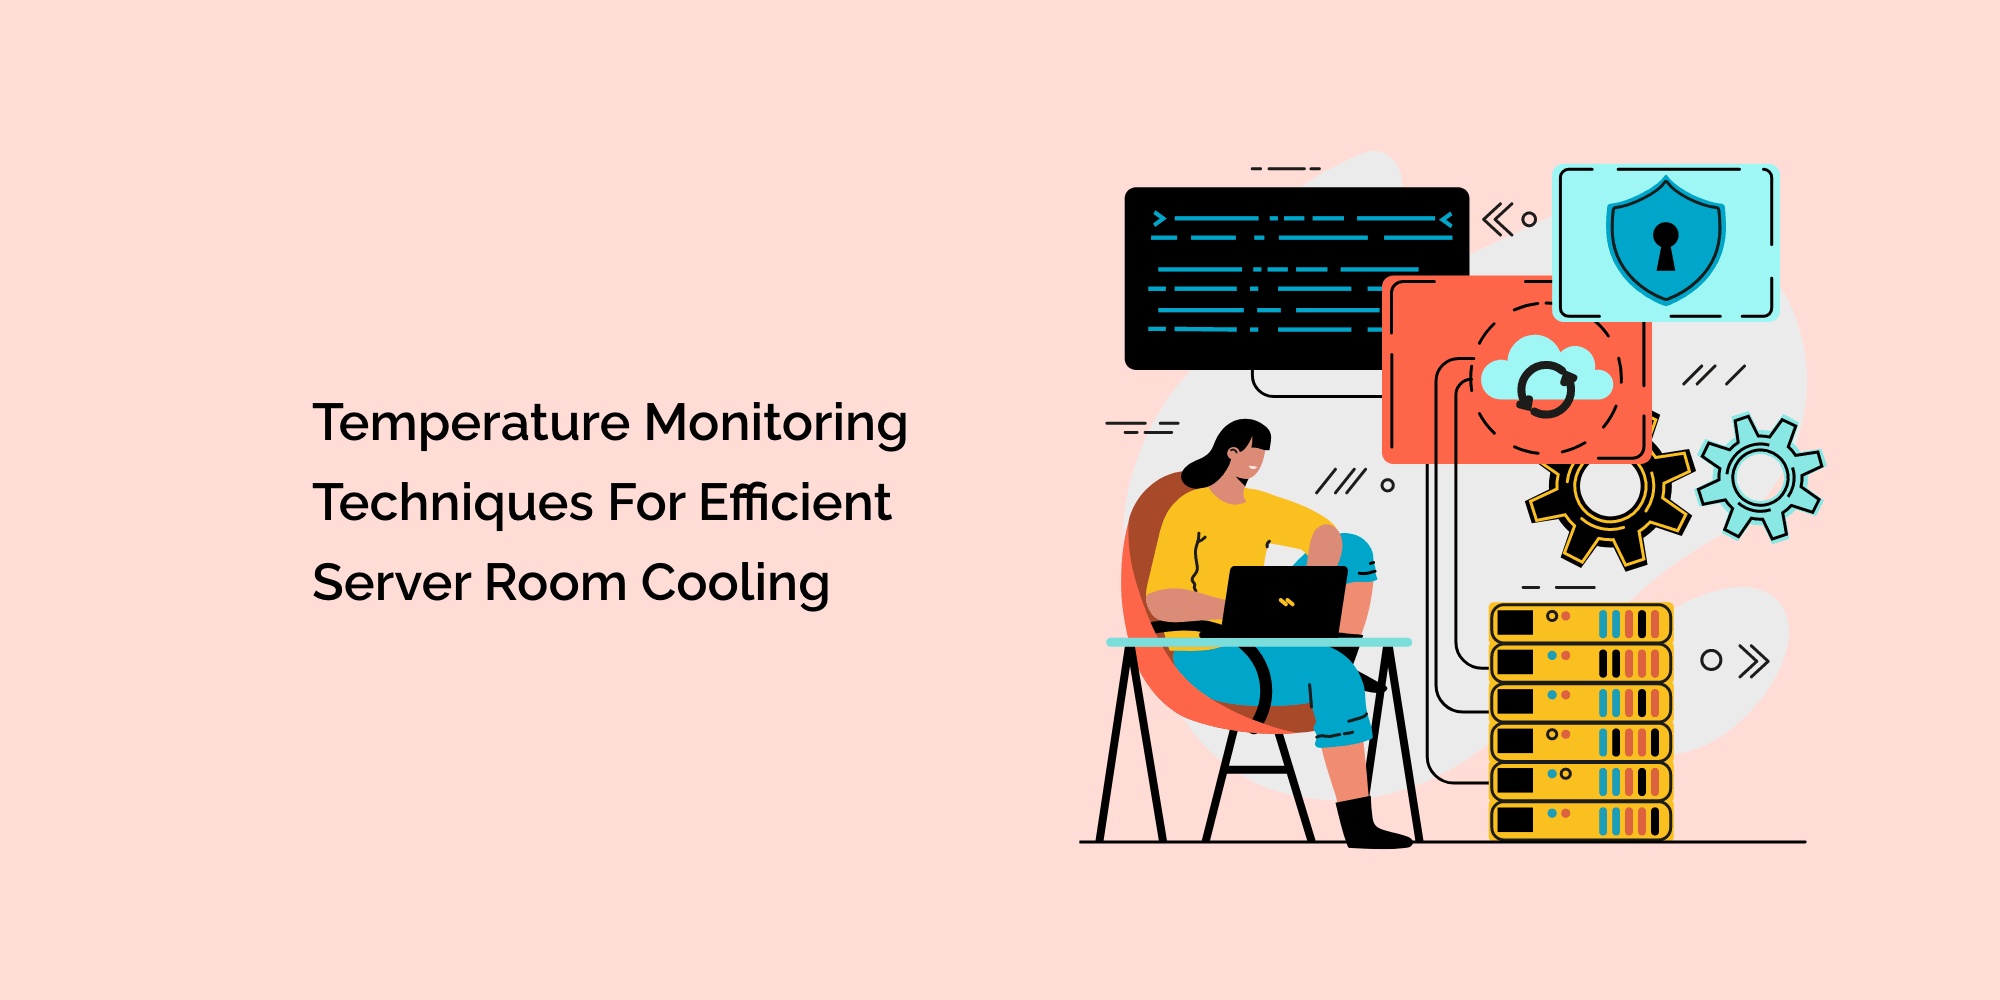 Temperature Monitoring Techniques for Efficient Server Room Cooling